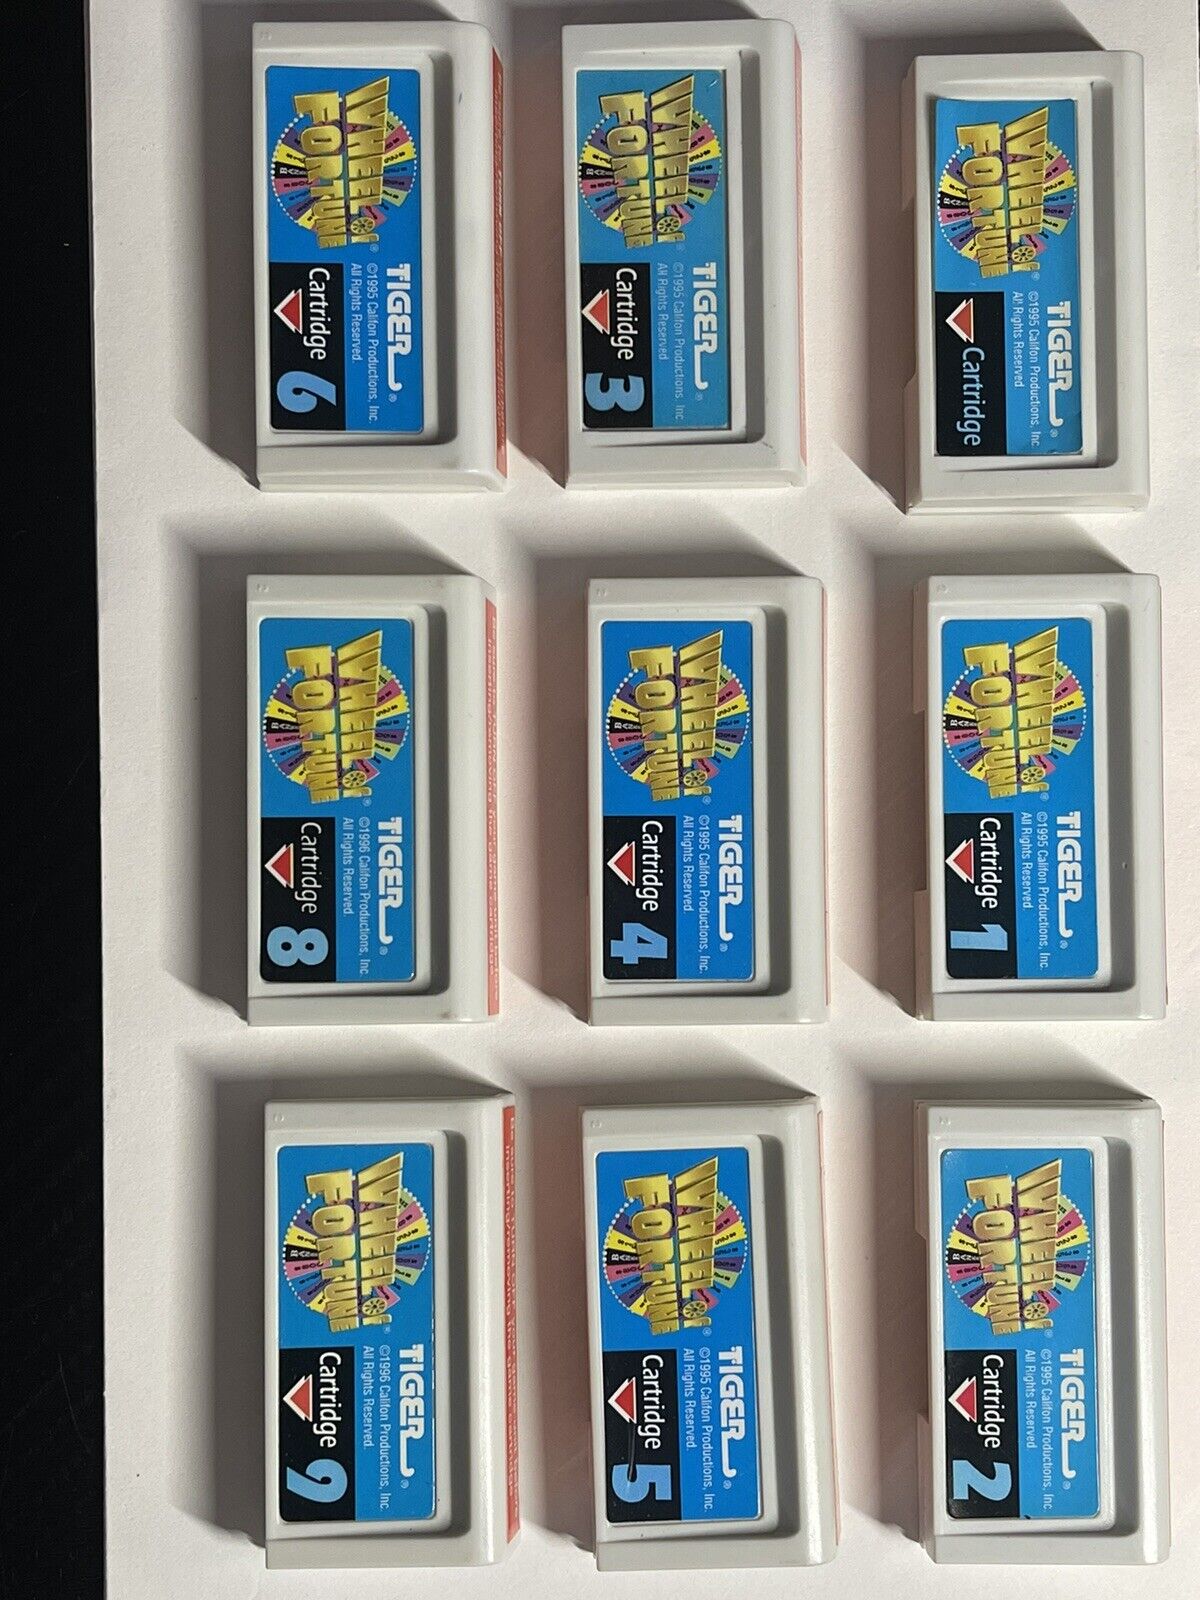 1995 Tiger Electronics Wheel Of Fortune Hand Held Game Cartridges( 0, 1-6, 8, 9)